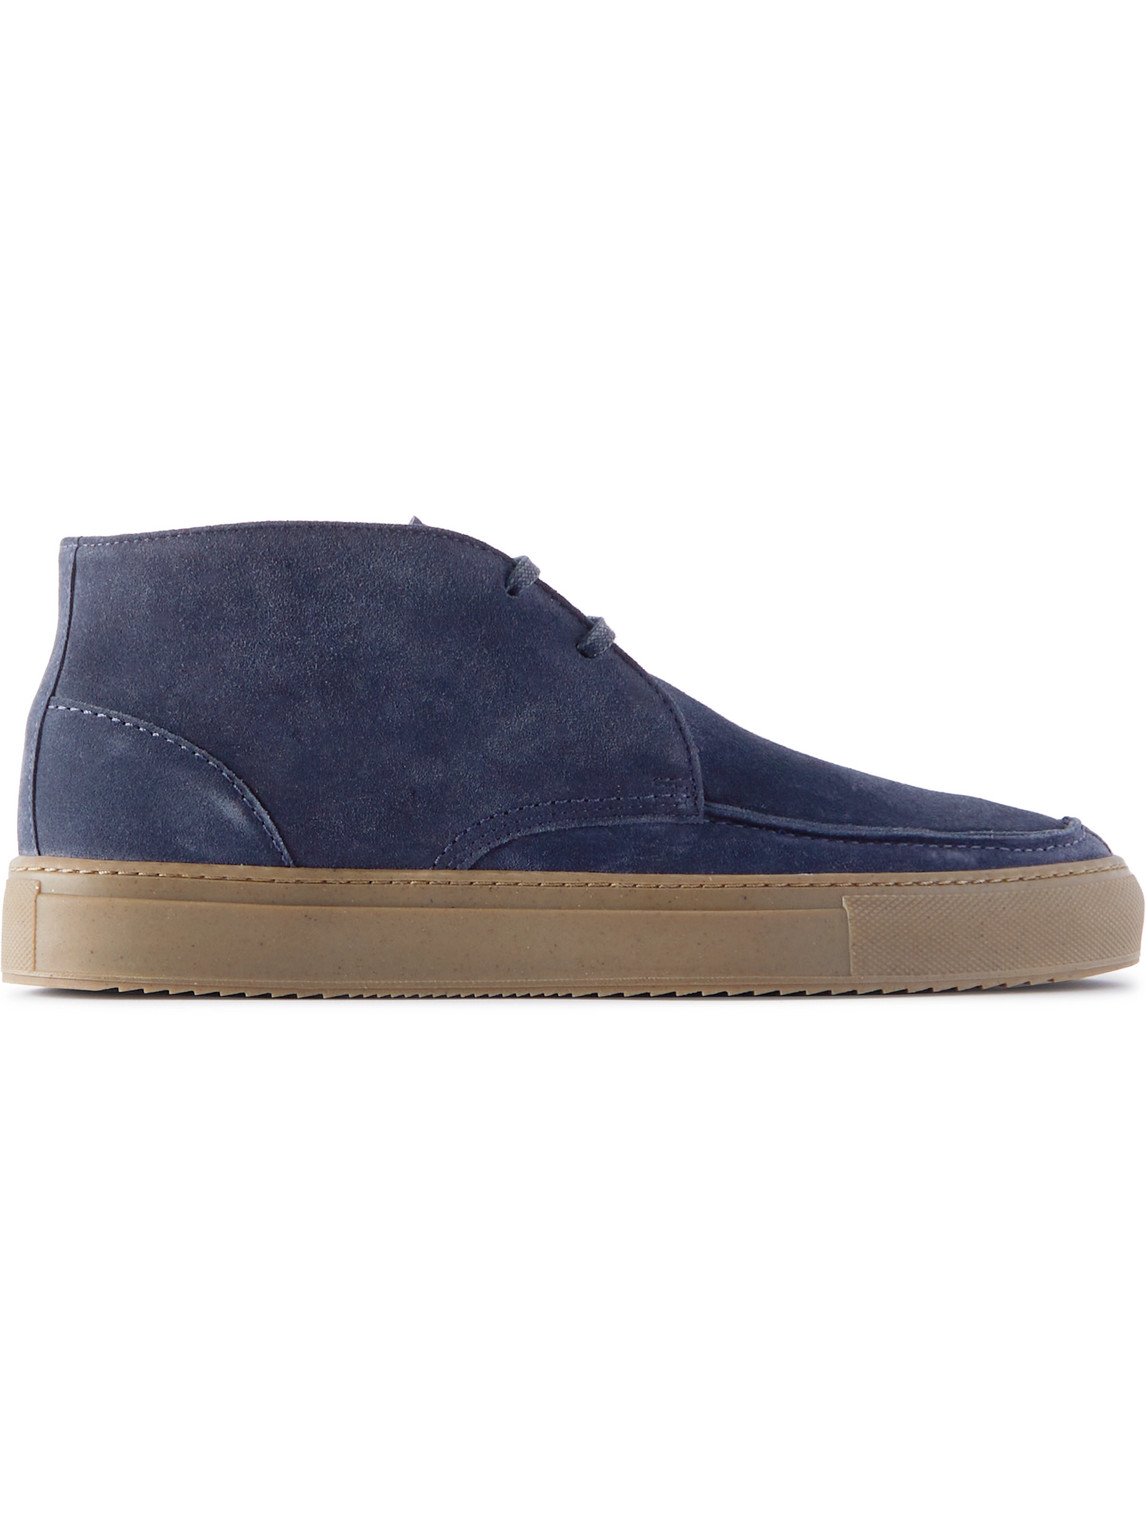 Mr P. Larry Regenerated Suede By Evolo® Chukka Boots In Blue | ModeSens